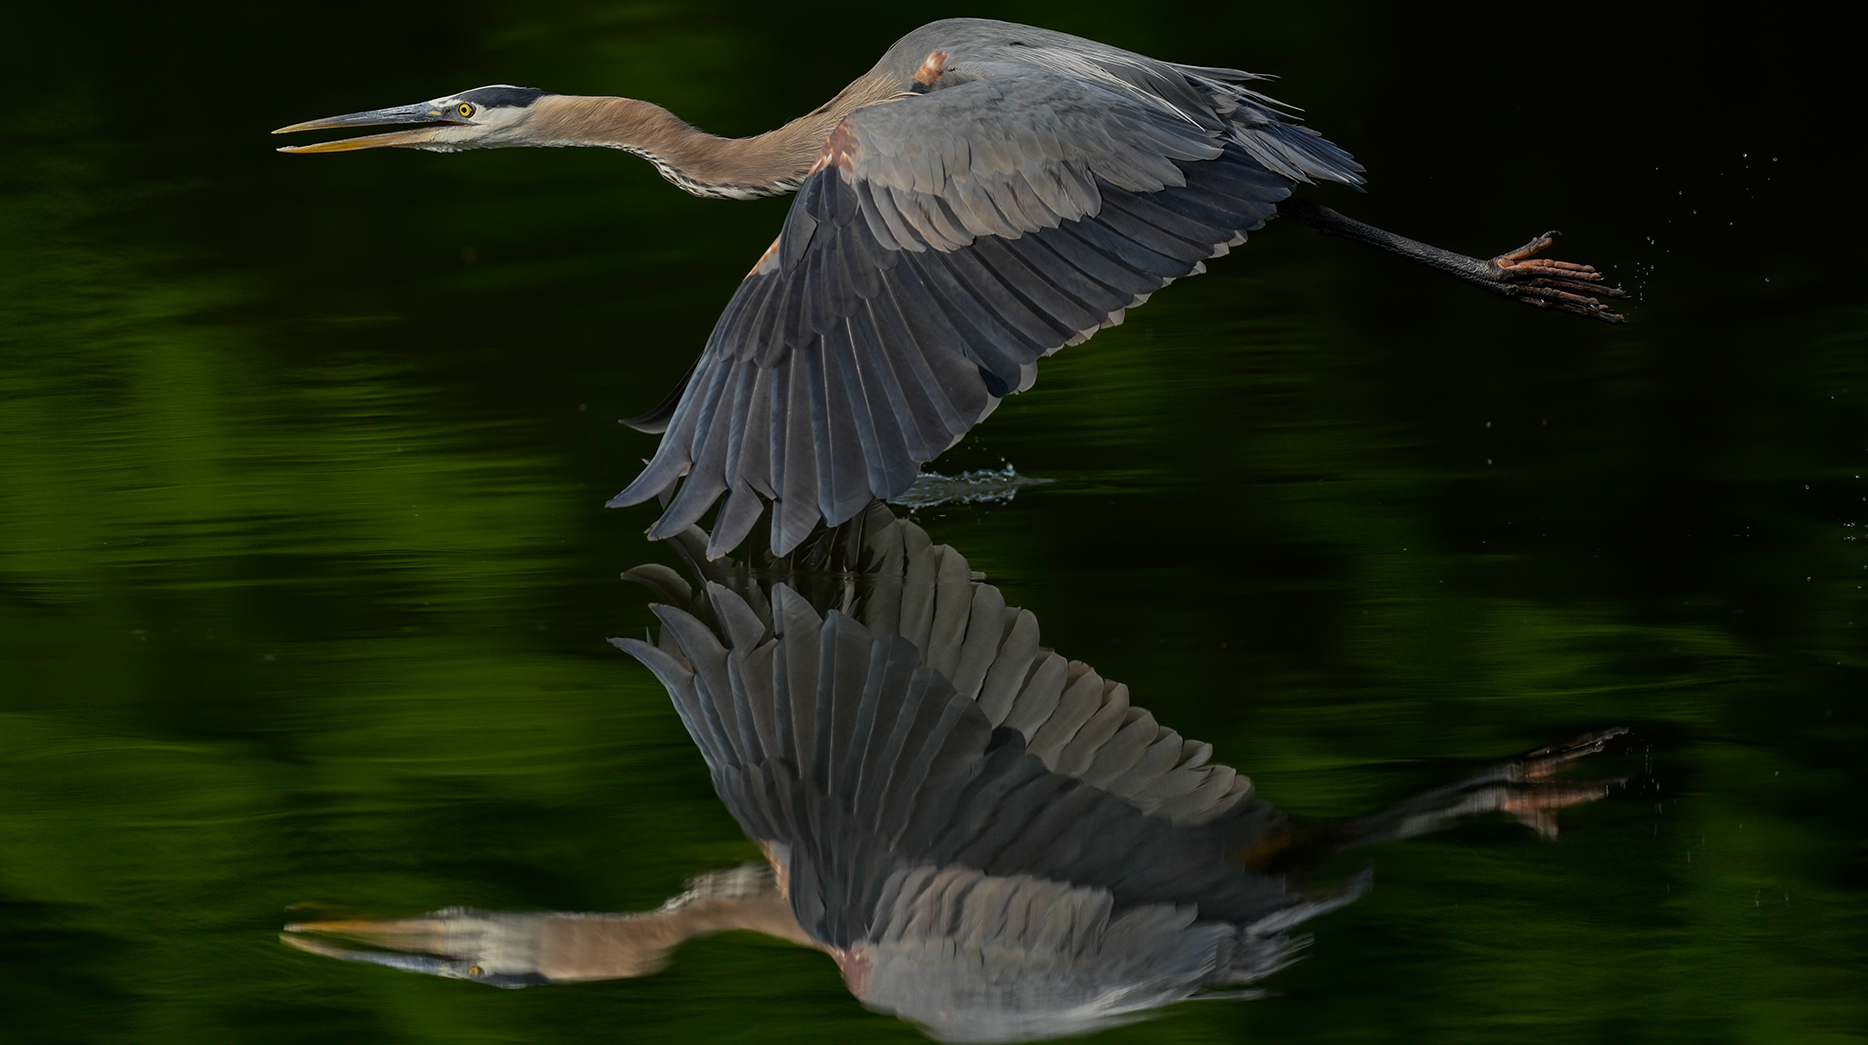 A large, gray wading bird in flight over water. 